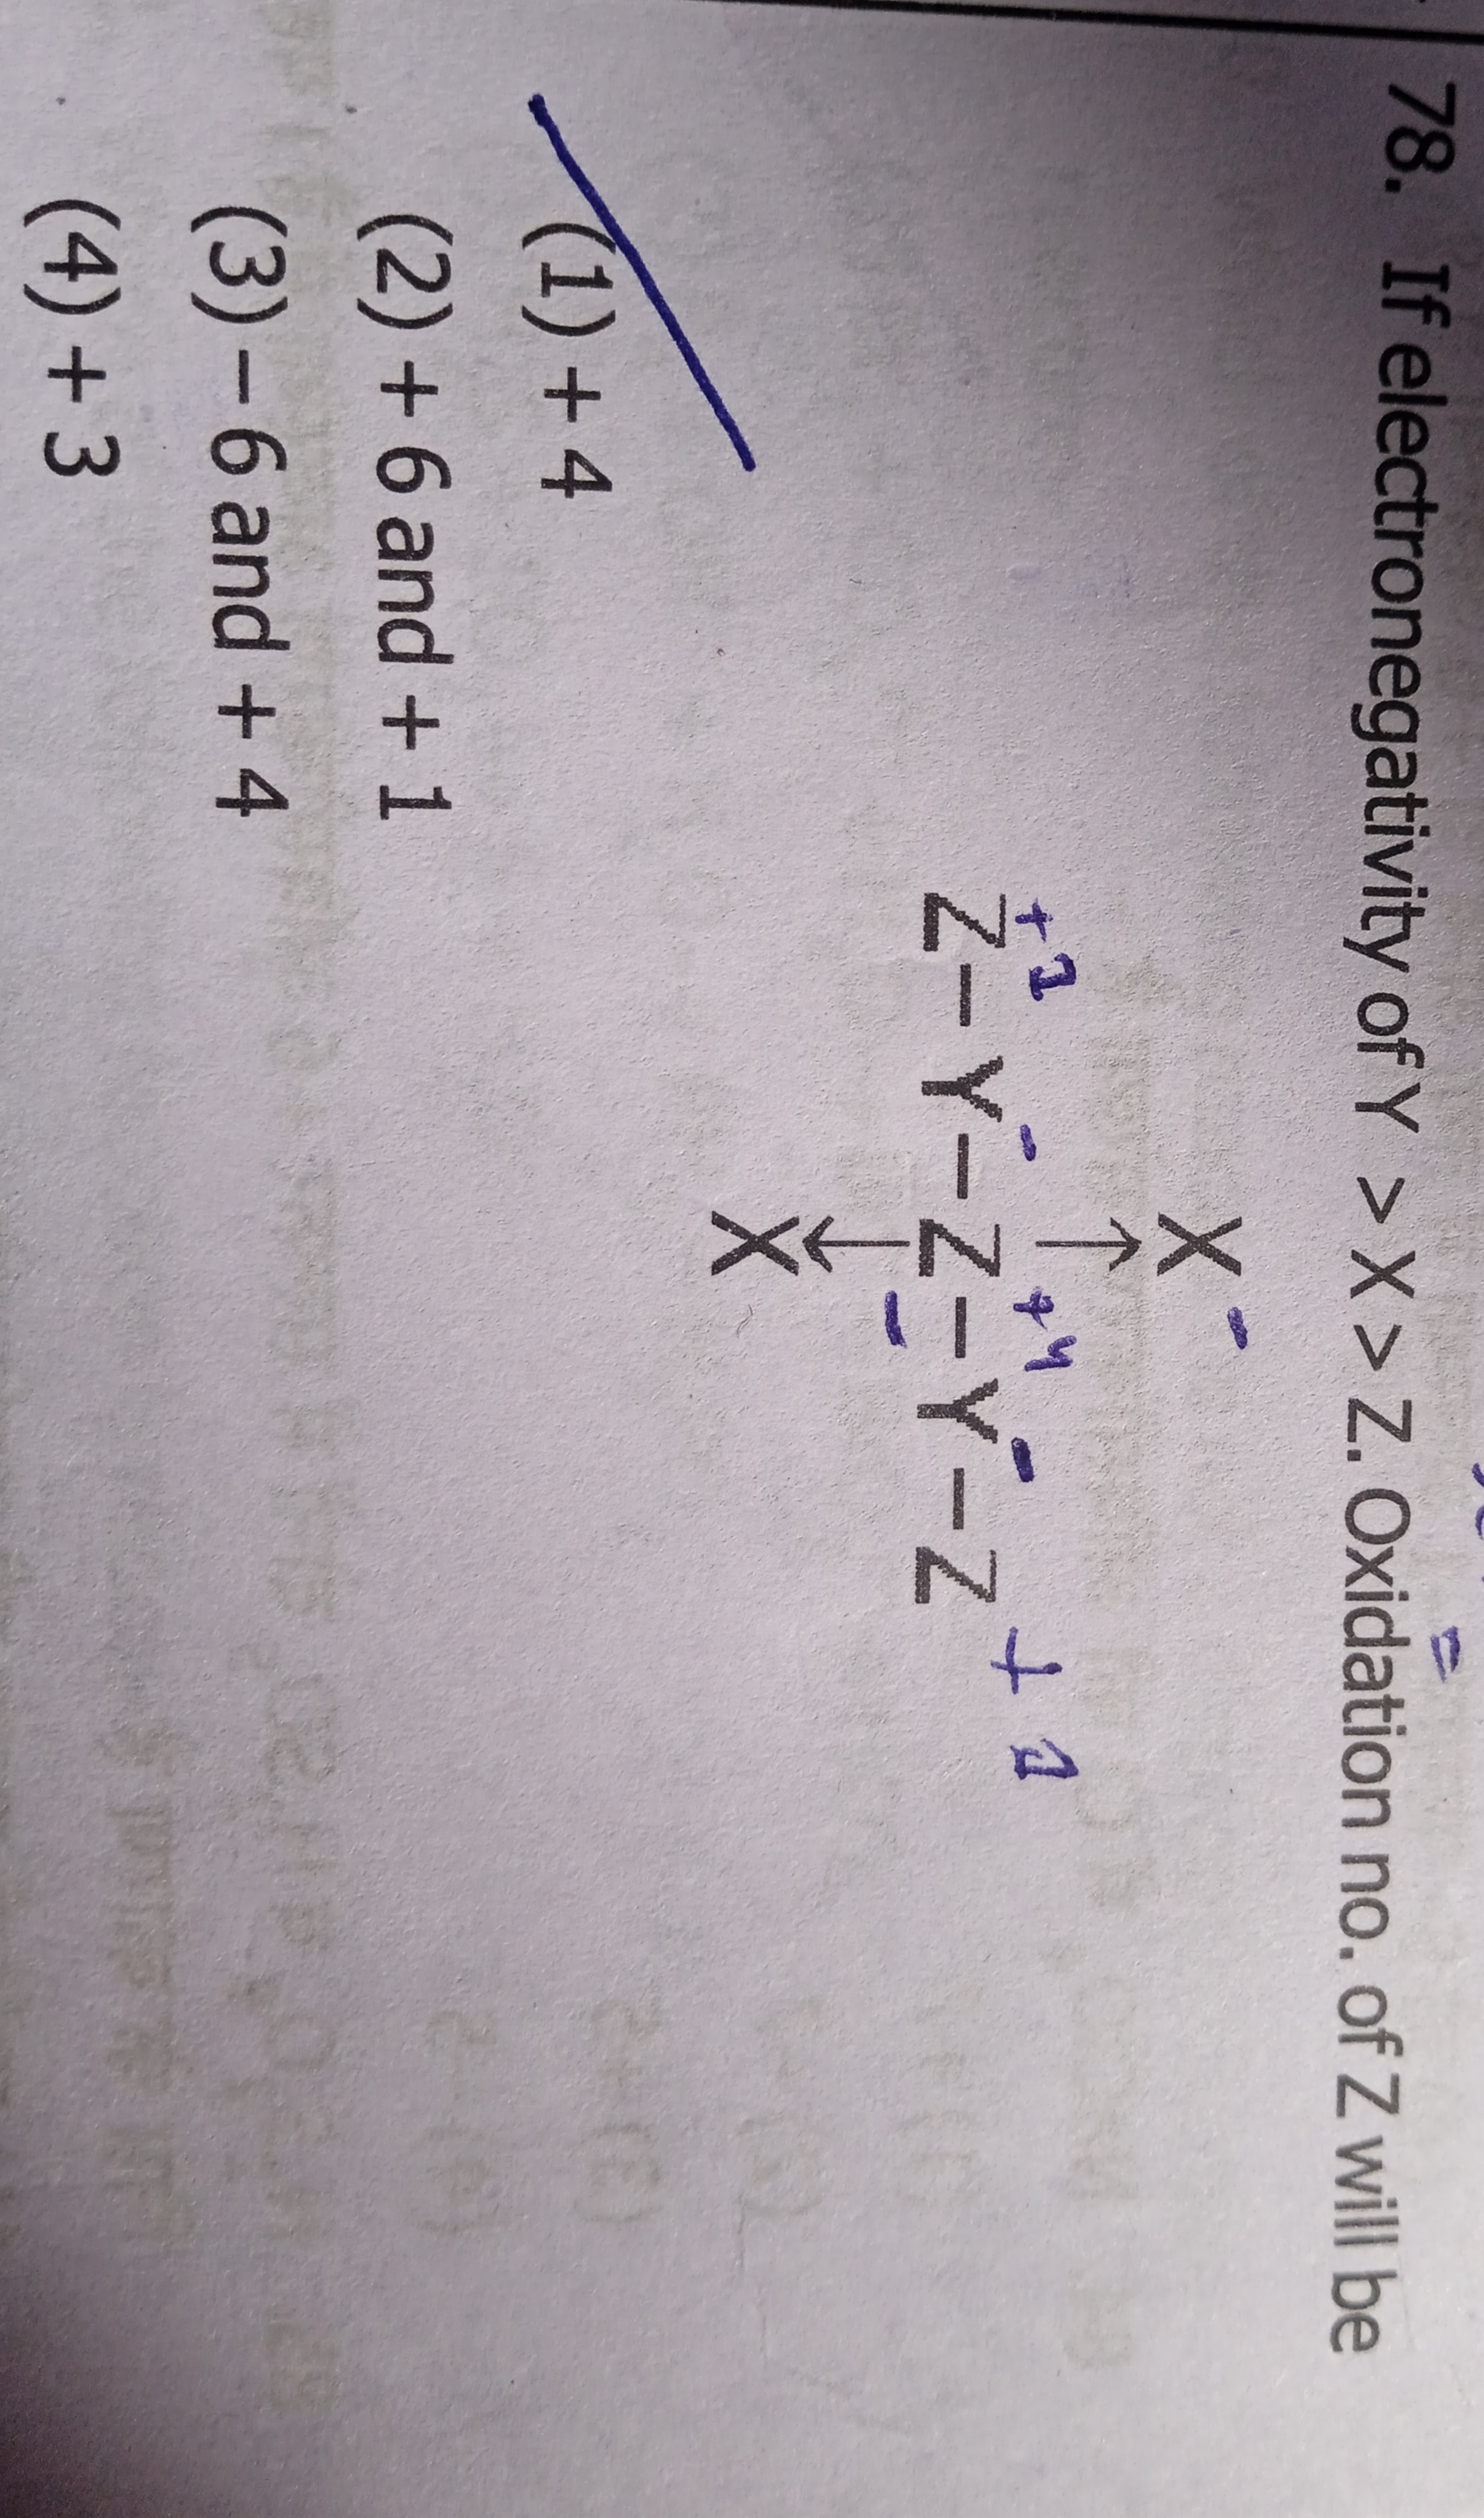 78. If electronegativity of Y>X>Z. Oxidation no. of Z will be
[Z][Y][T